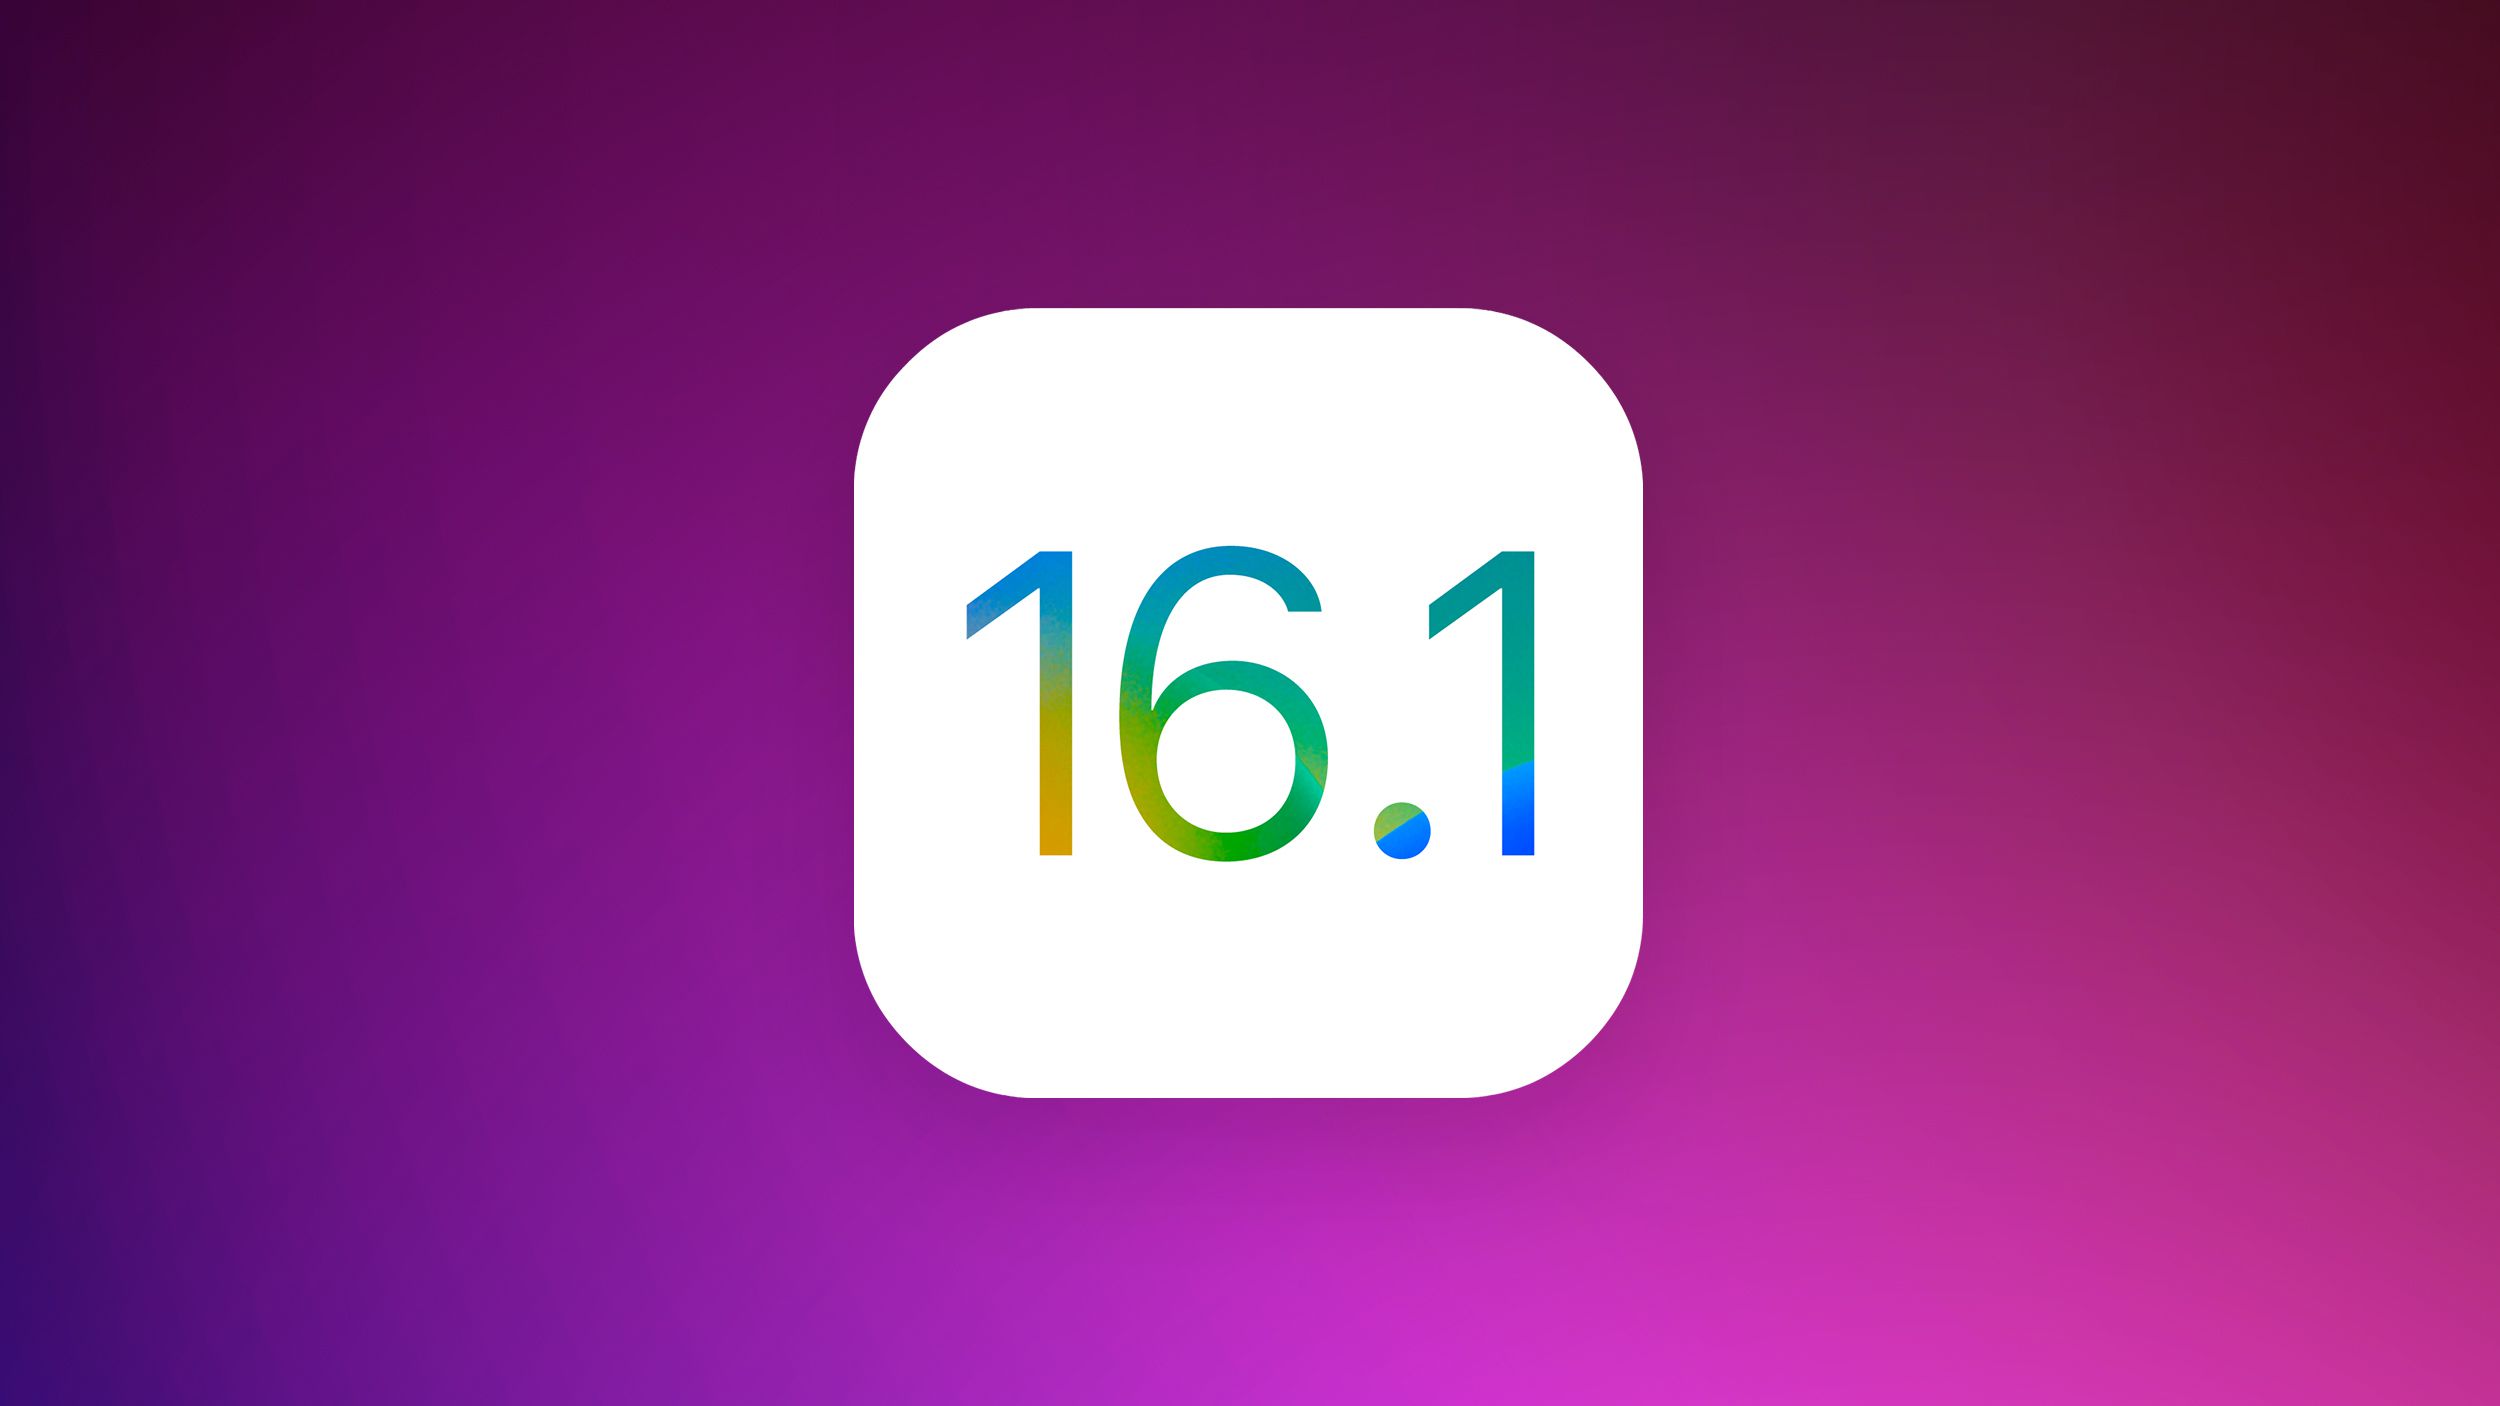 Apple Seeds New Public Betas of iOS 16.1 and iPadOS 16.1 With Stage Manager for ..